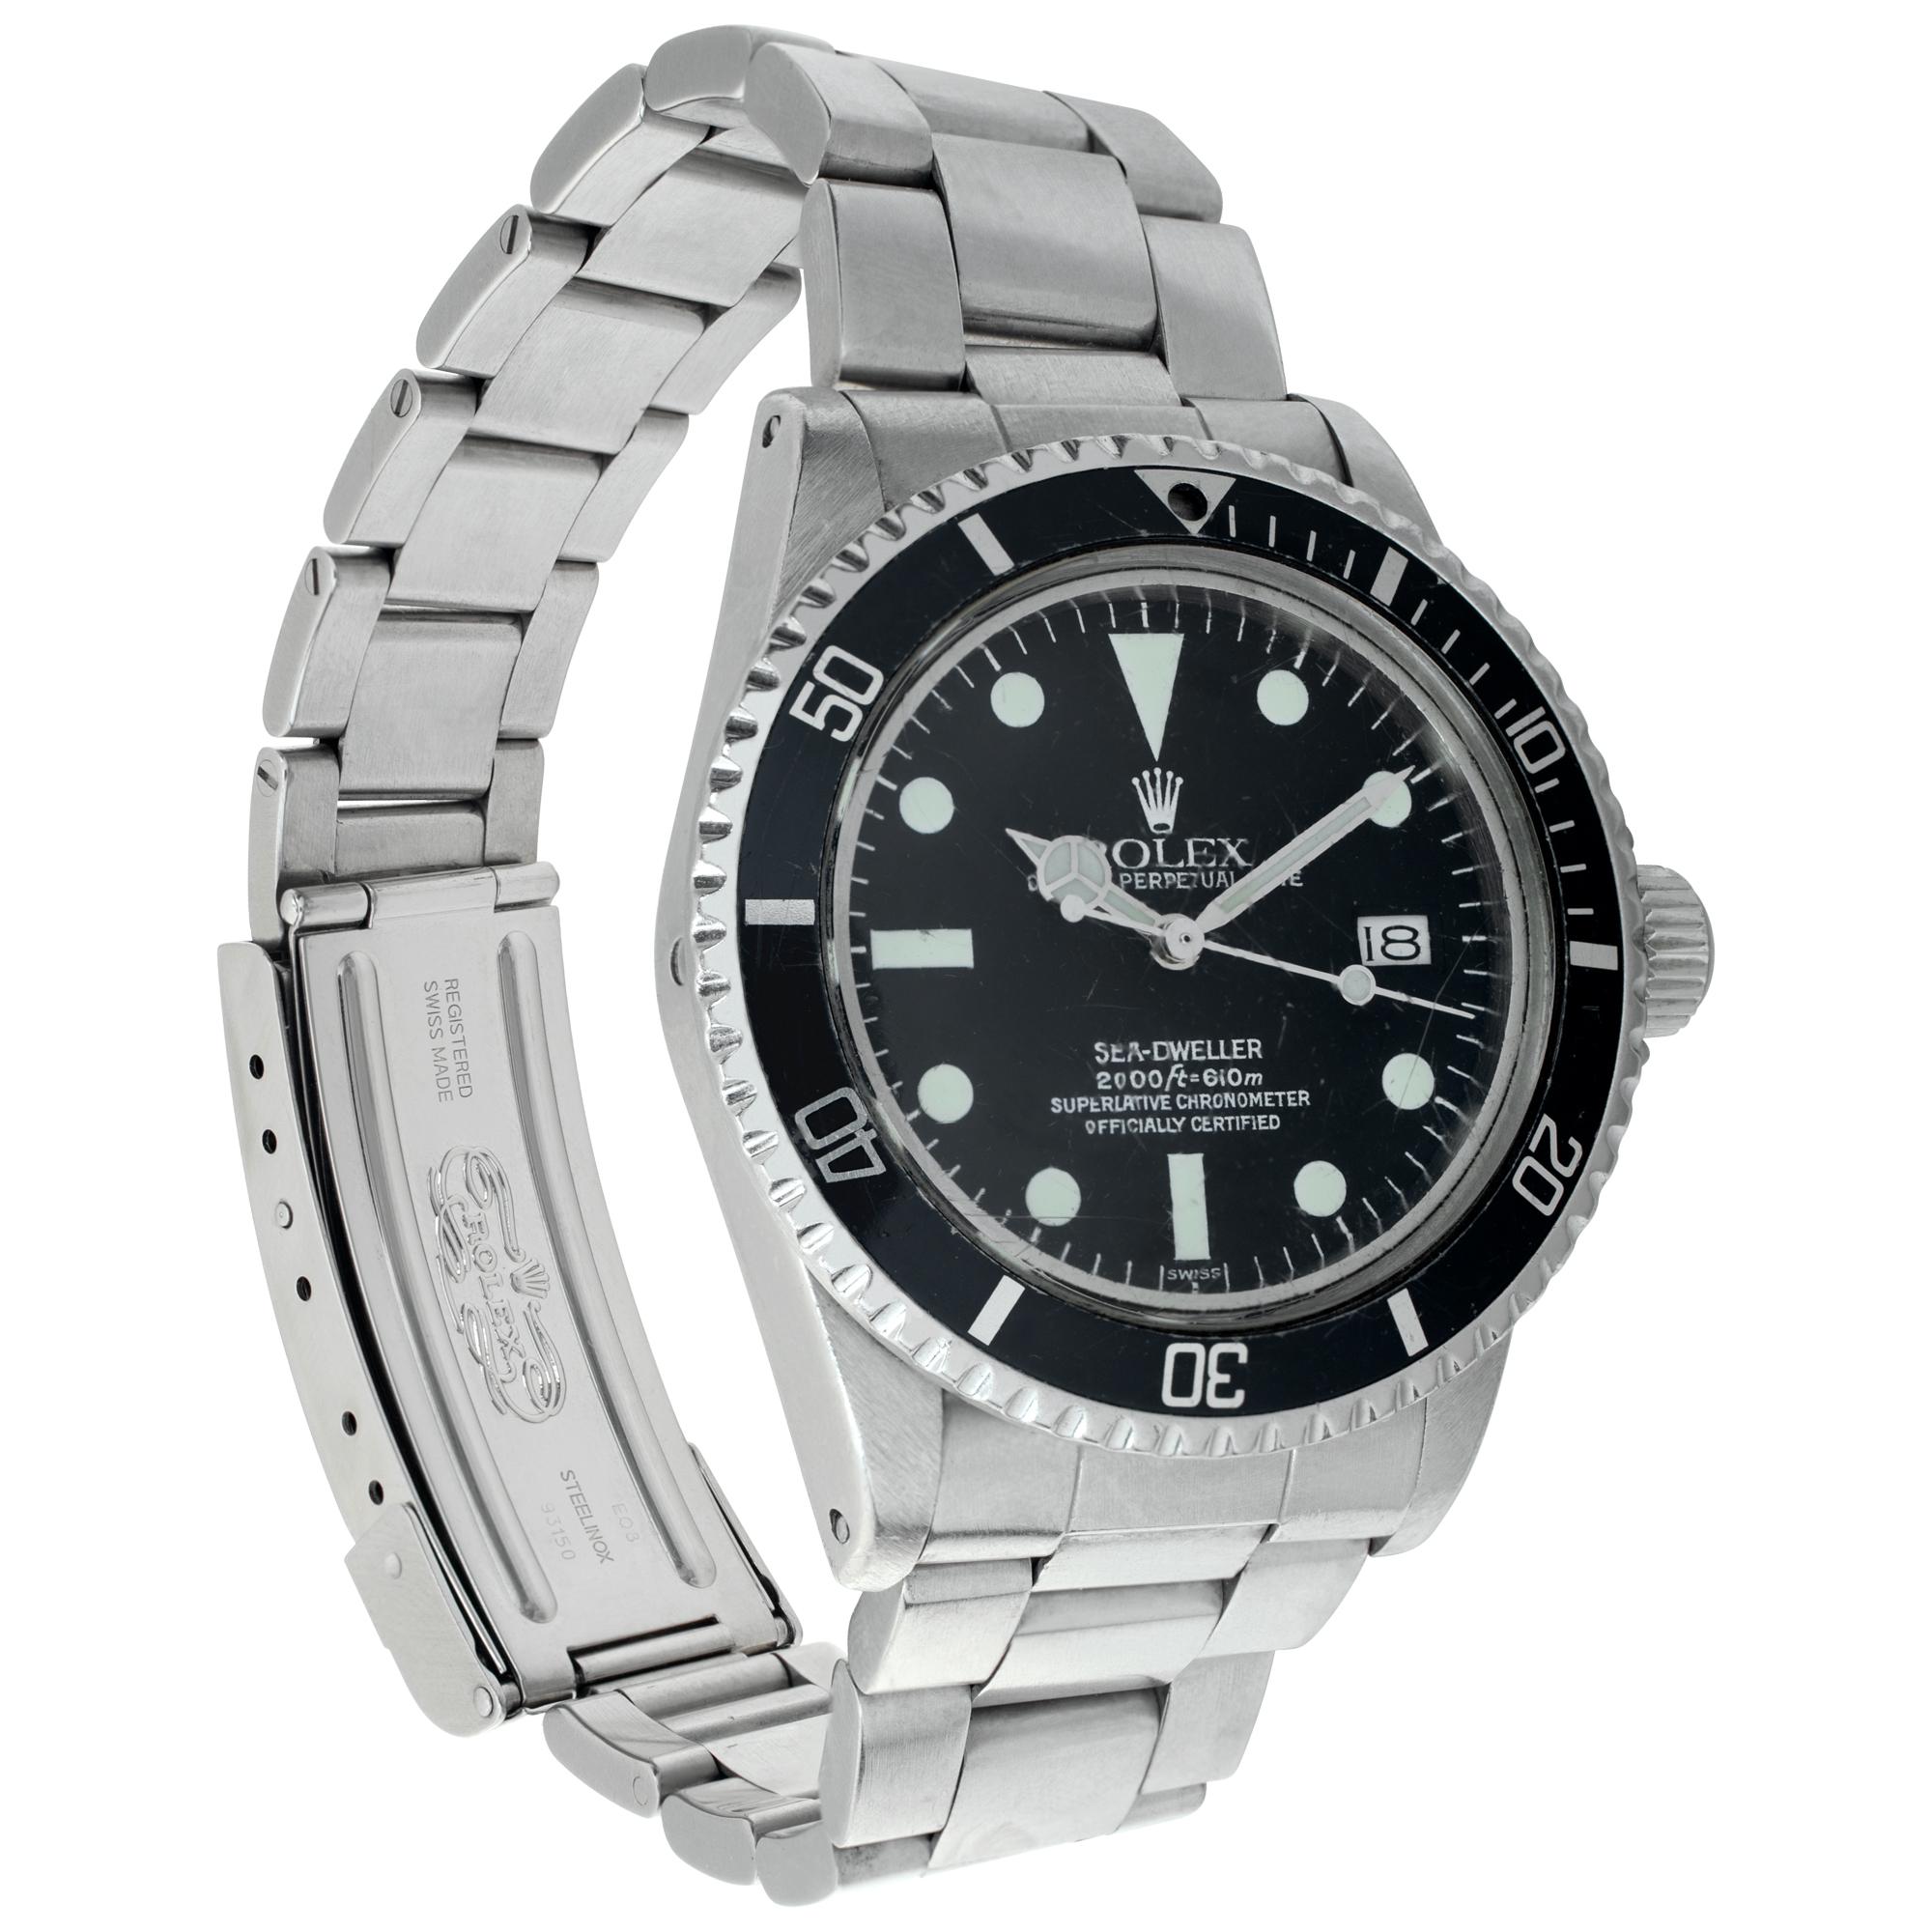 Rolex Sea-Dweller stainless steel Automatic Wristwatch Ref 1665 In Excellent Condition For Sale In Surfside, FL